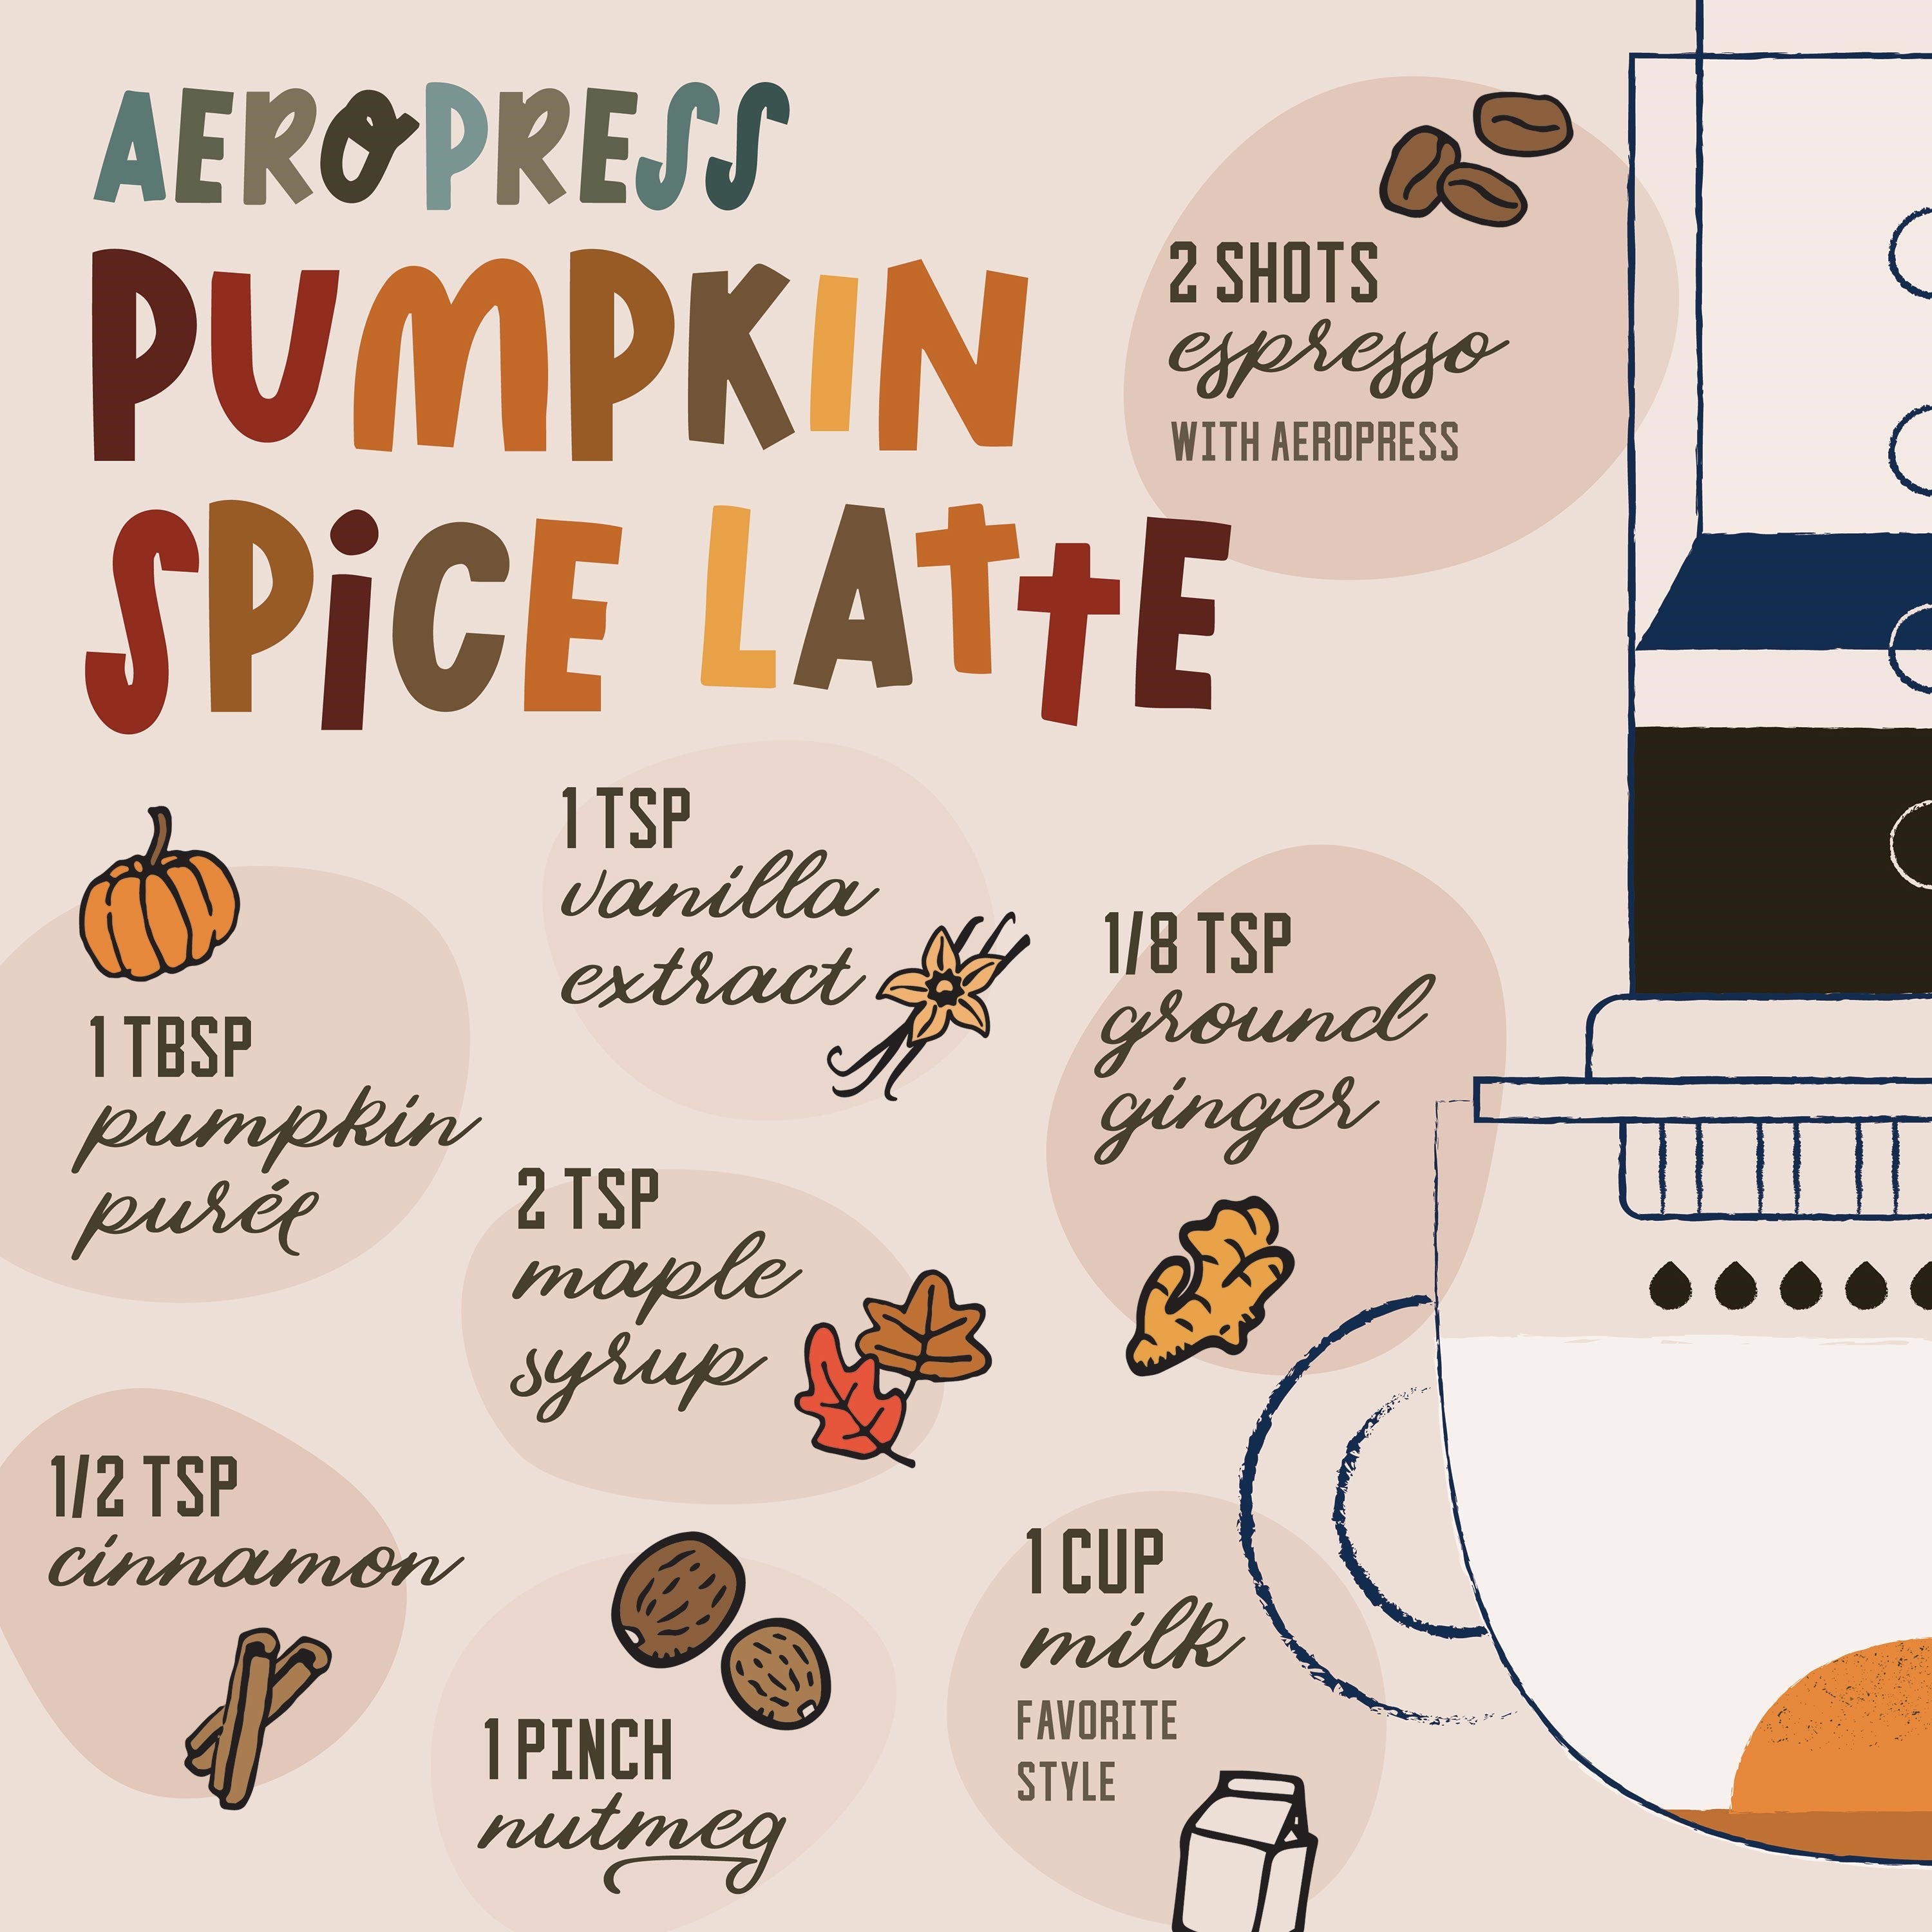 Ingredients for a pumpkin spice latte made with an AeroPress coffee maker